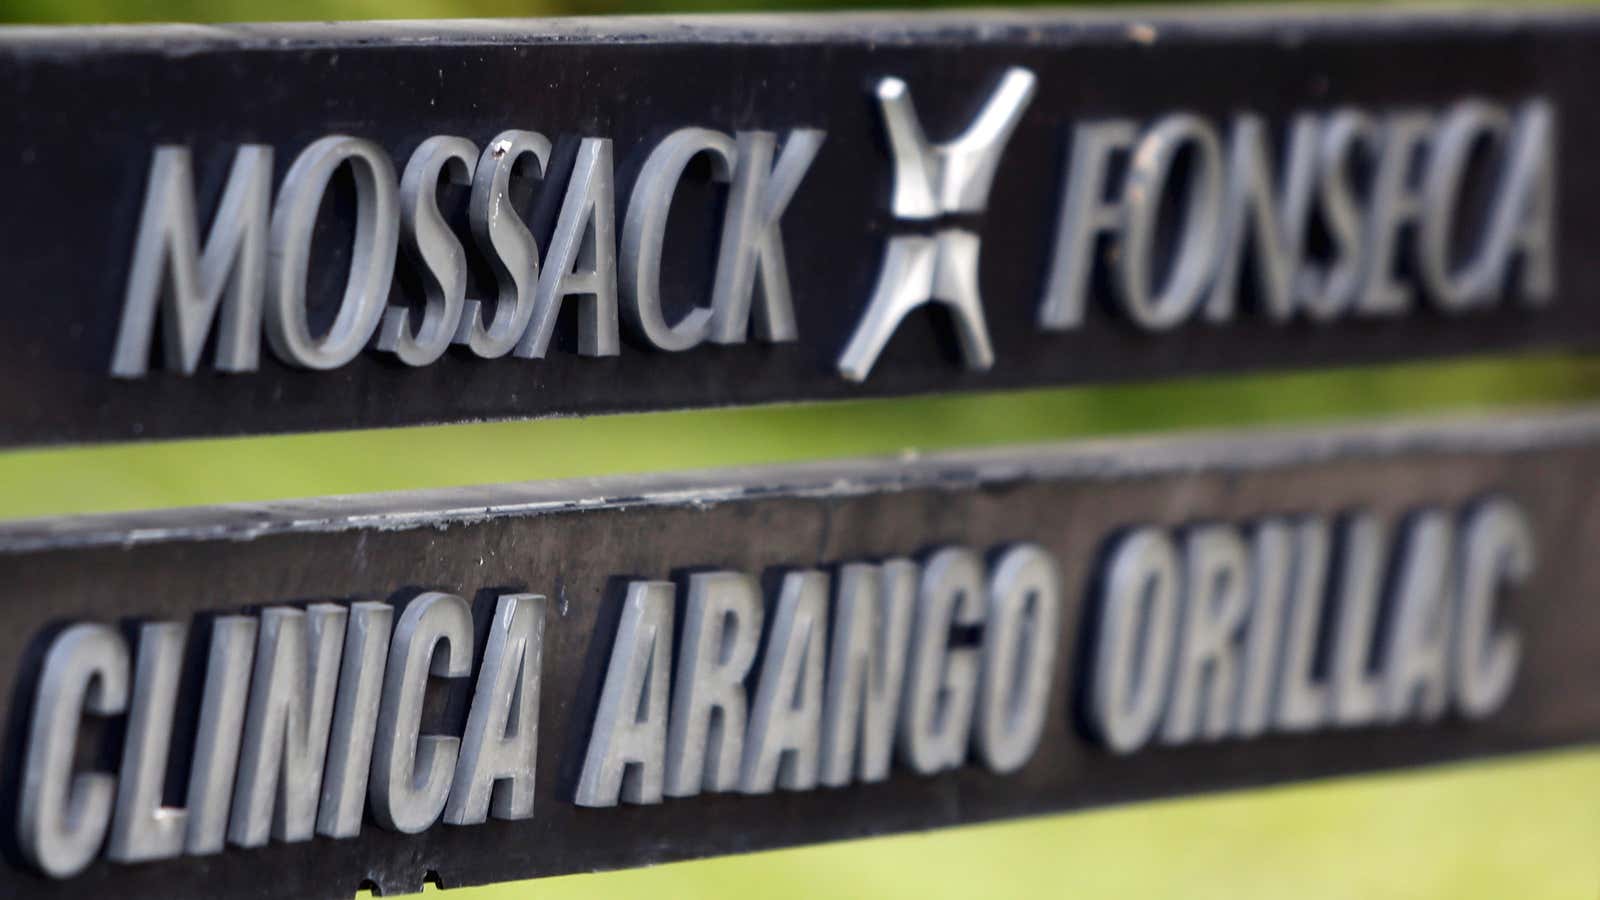 The data dump on Mossack Fonseca marked the beginning of the largest international investigative journalism project of all time.